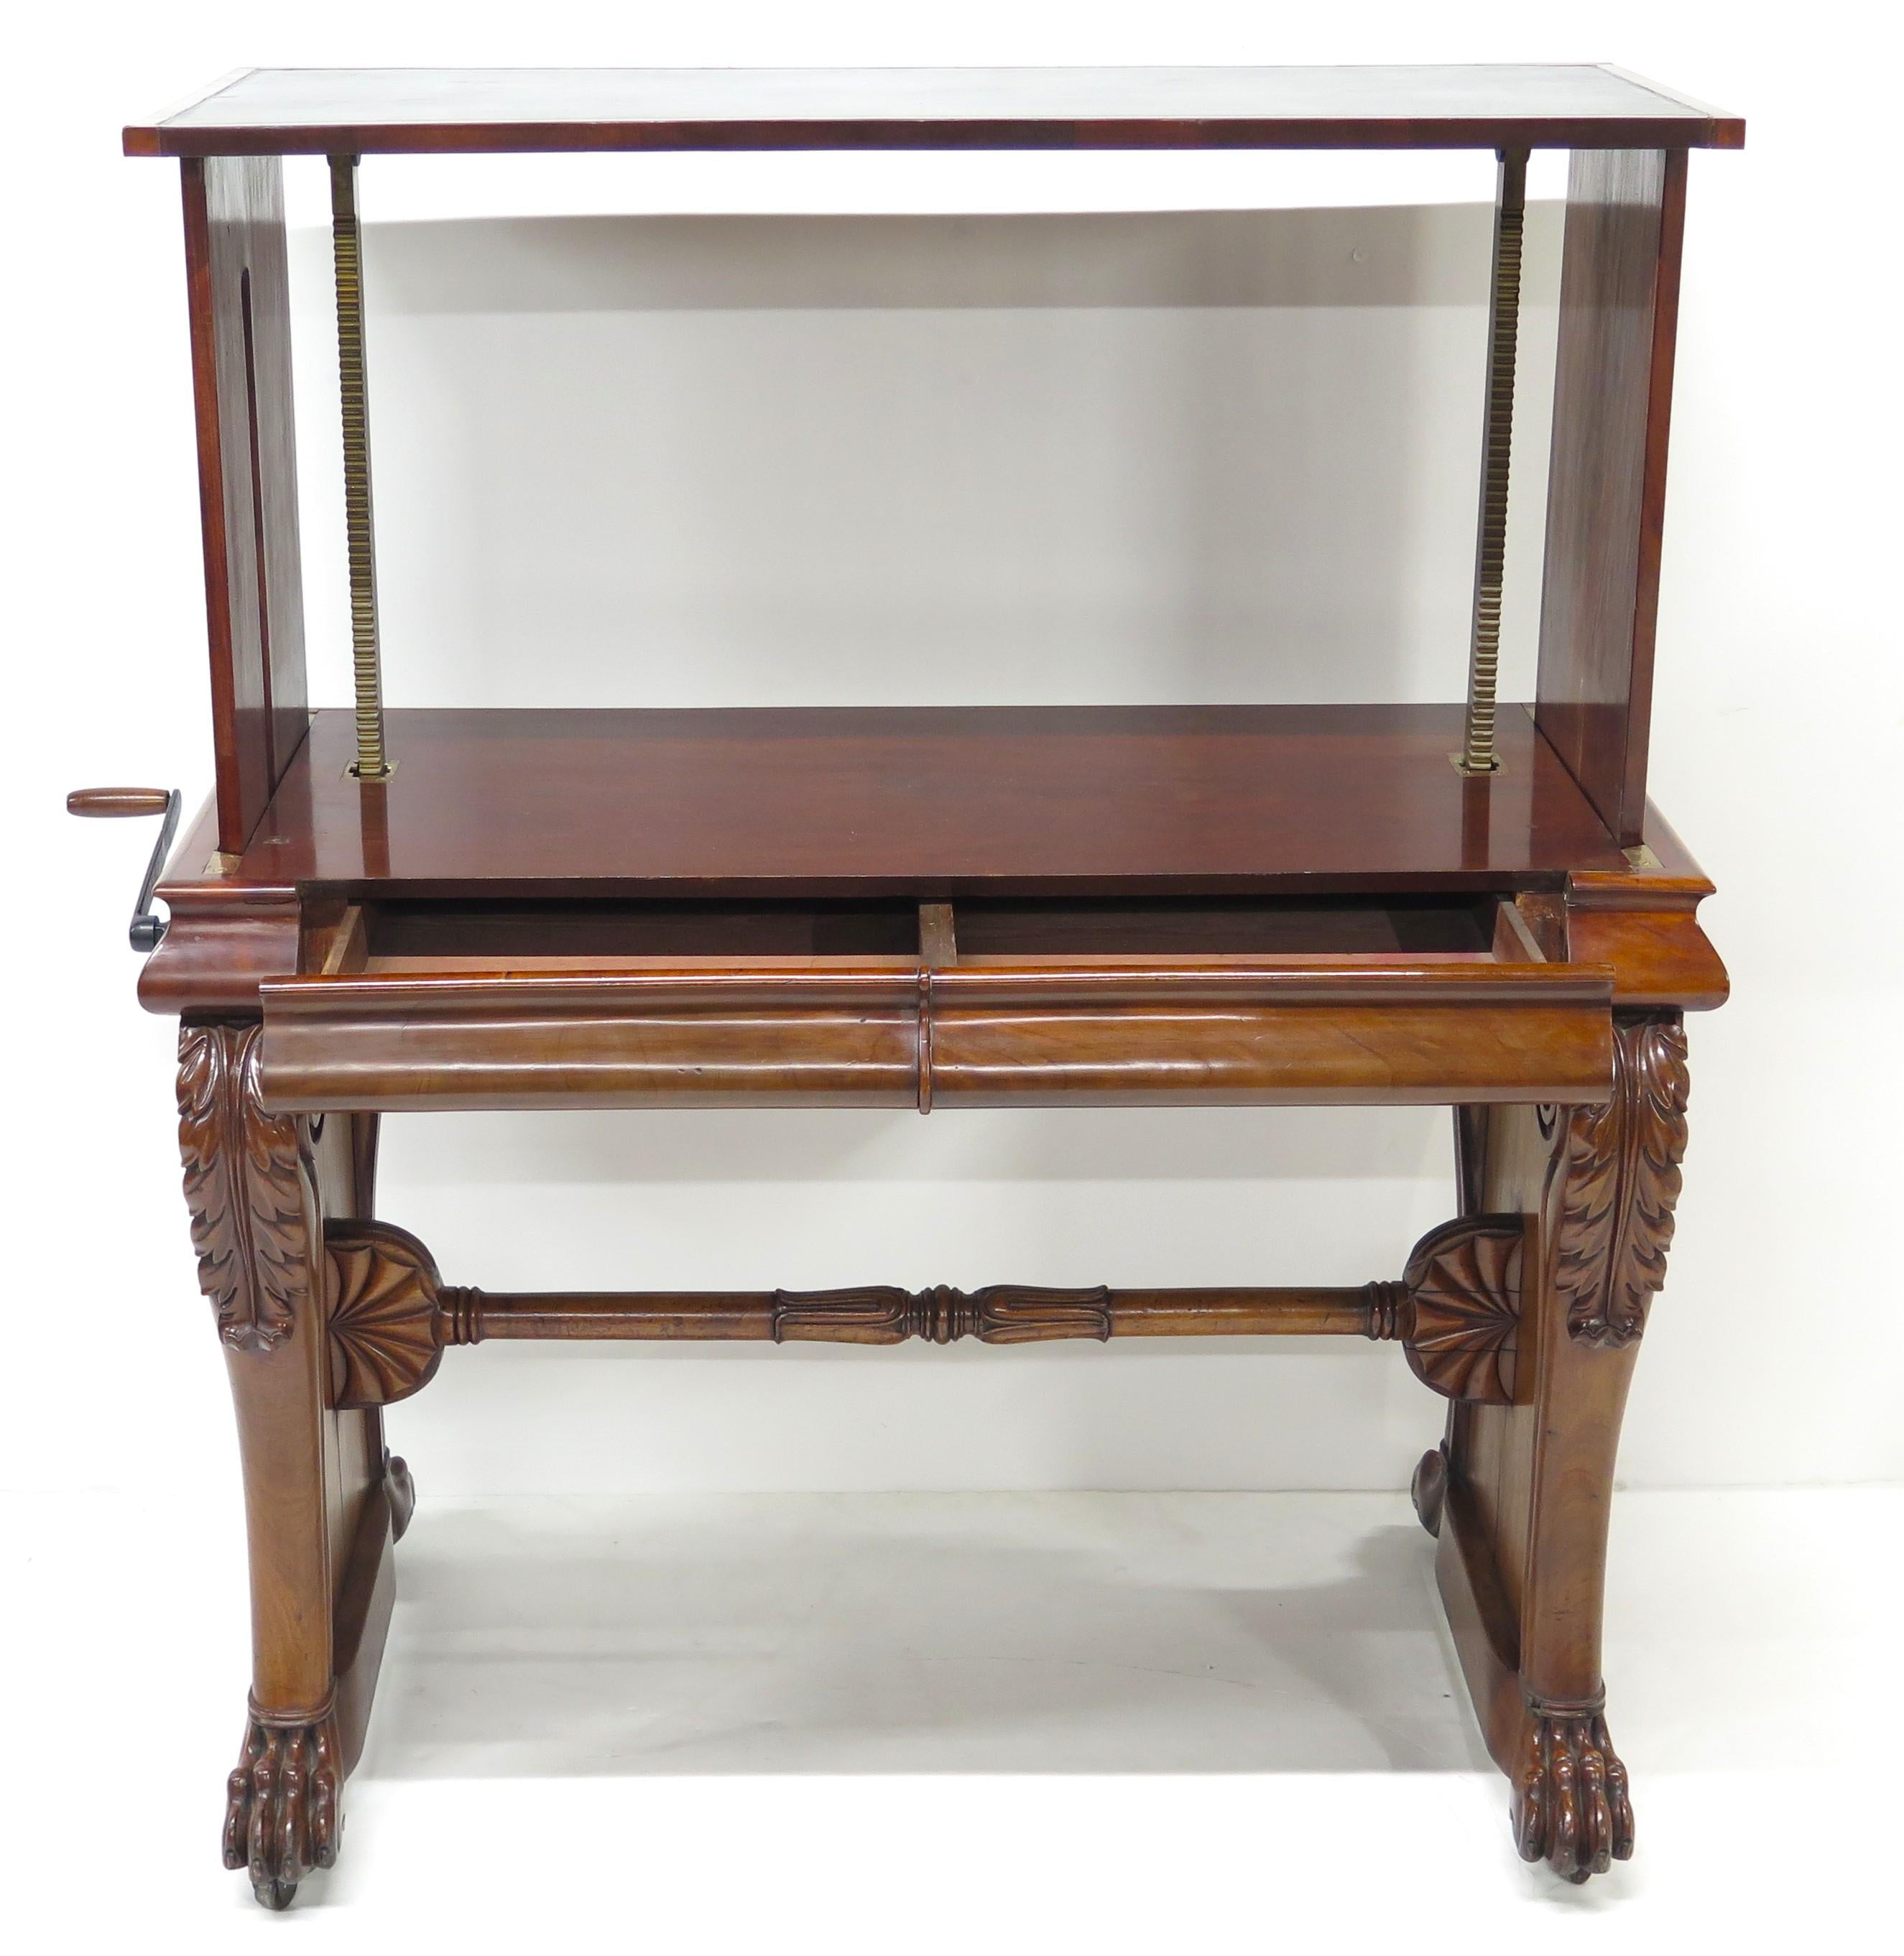 William IV mahogany stretcher based library table with black leather top / surface, top height is adjustable with  crank on side, lions paw feet, '' Hodges Dublin 